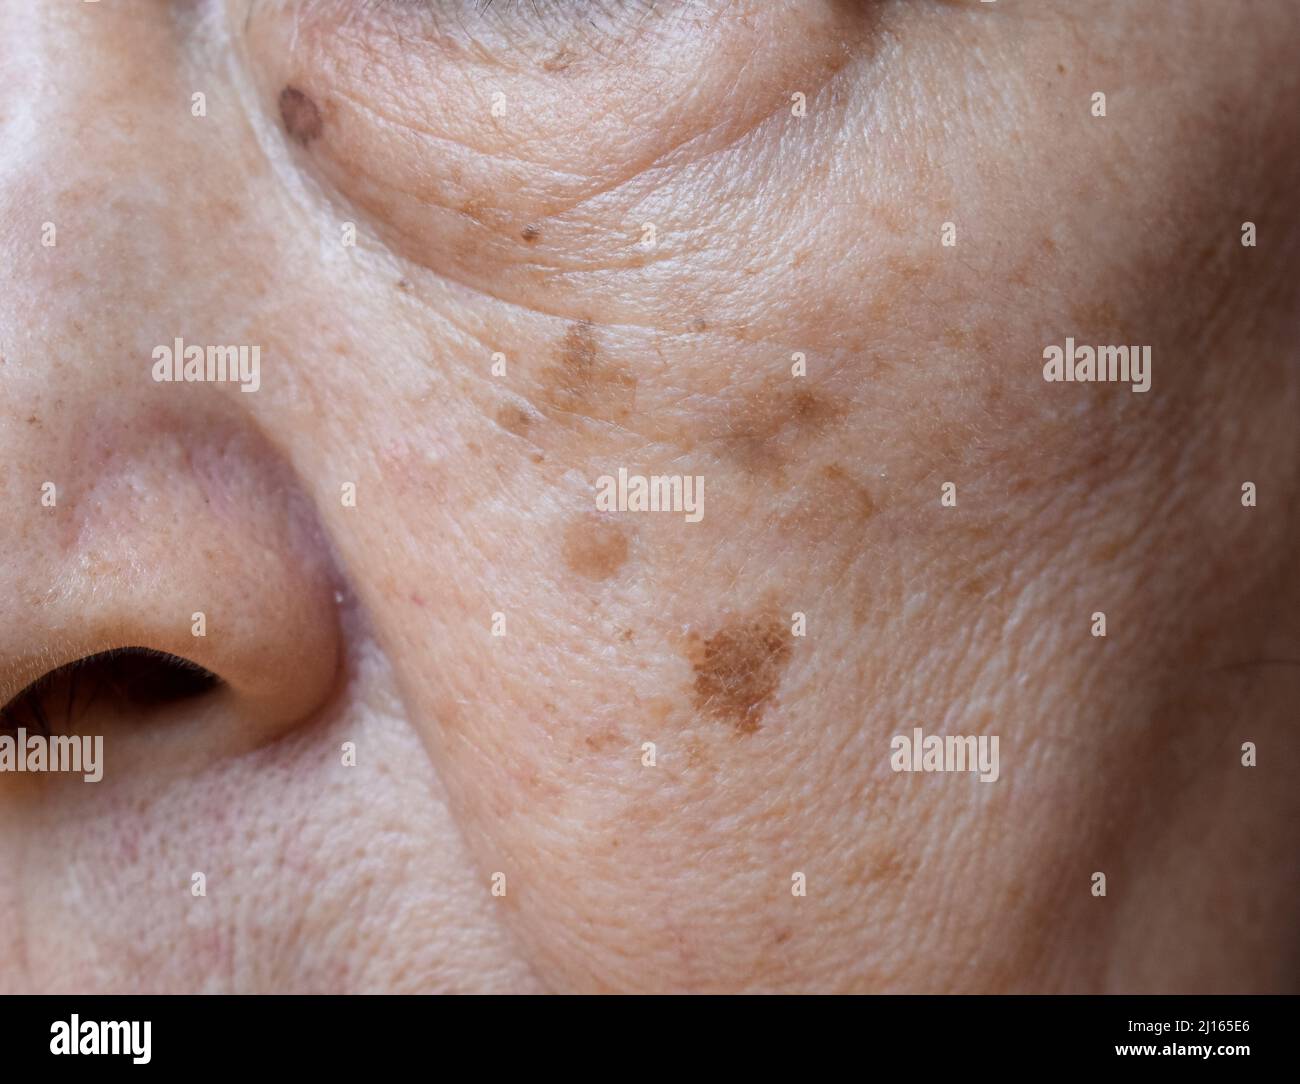 Small brown patches called age spots on face of Asian elder woman. They are also called liver spots, senile lentigo, or sun spots. Closeup view. Stock Photo